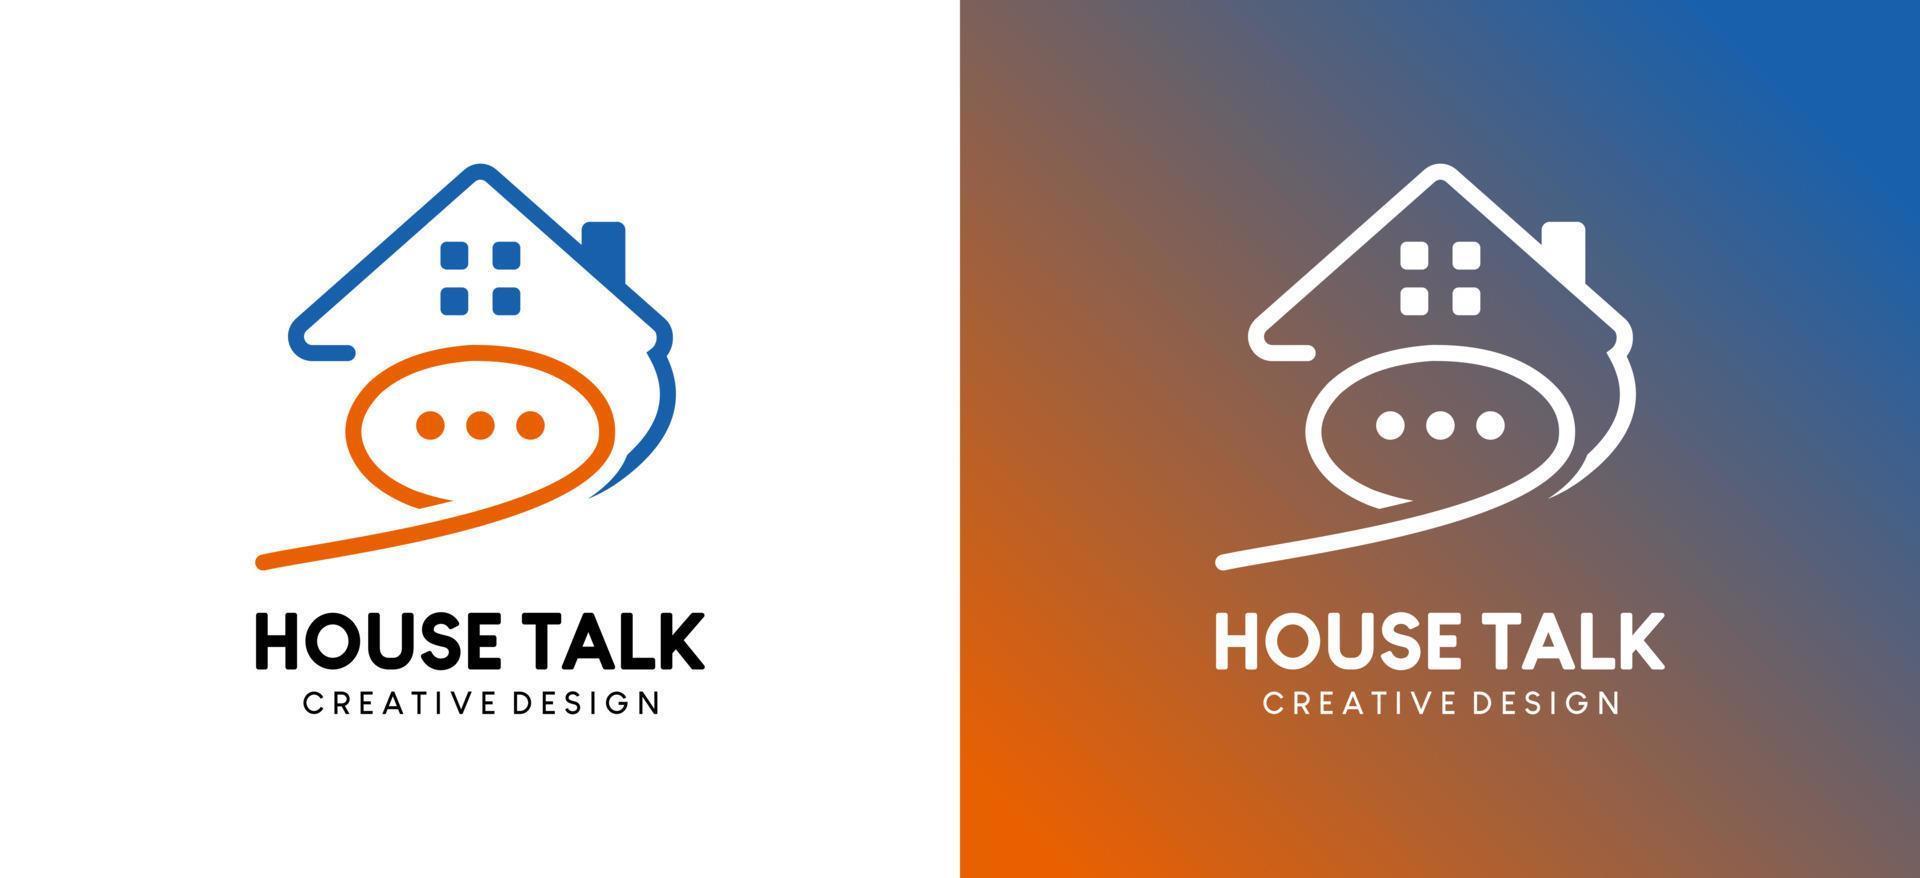 Home talk or home consulting logo design with line art style vector